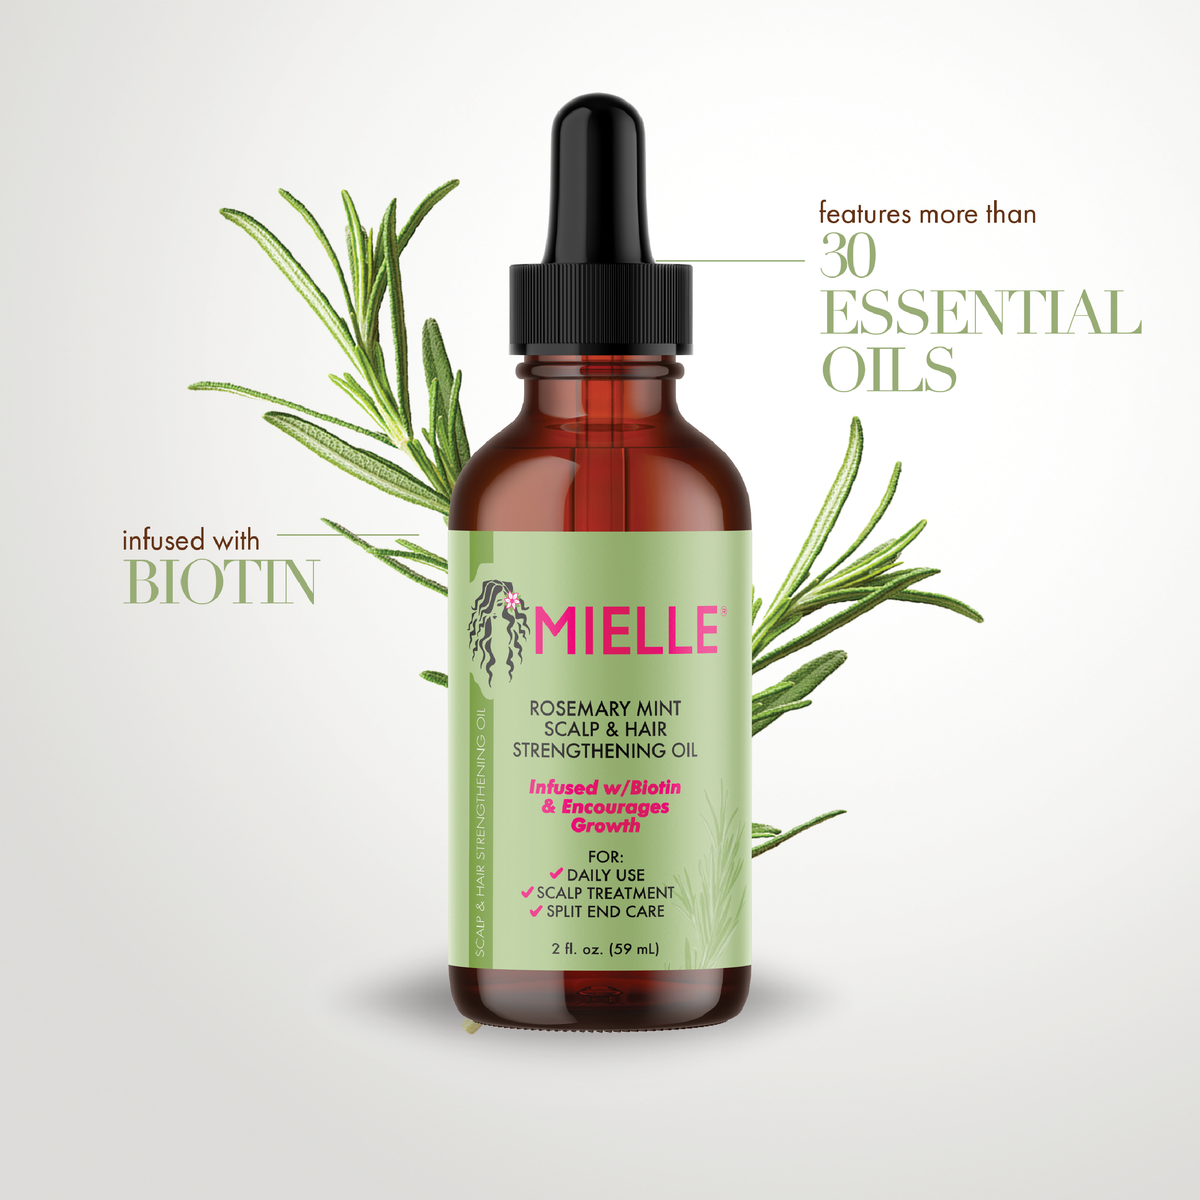 Mielle Rosemary Mint Scalp And Hair Strengthening Oil Skin Store Pakistan 3702